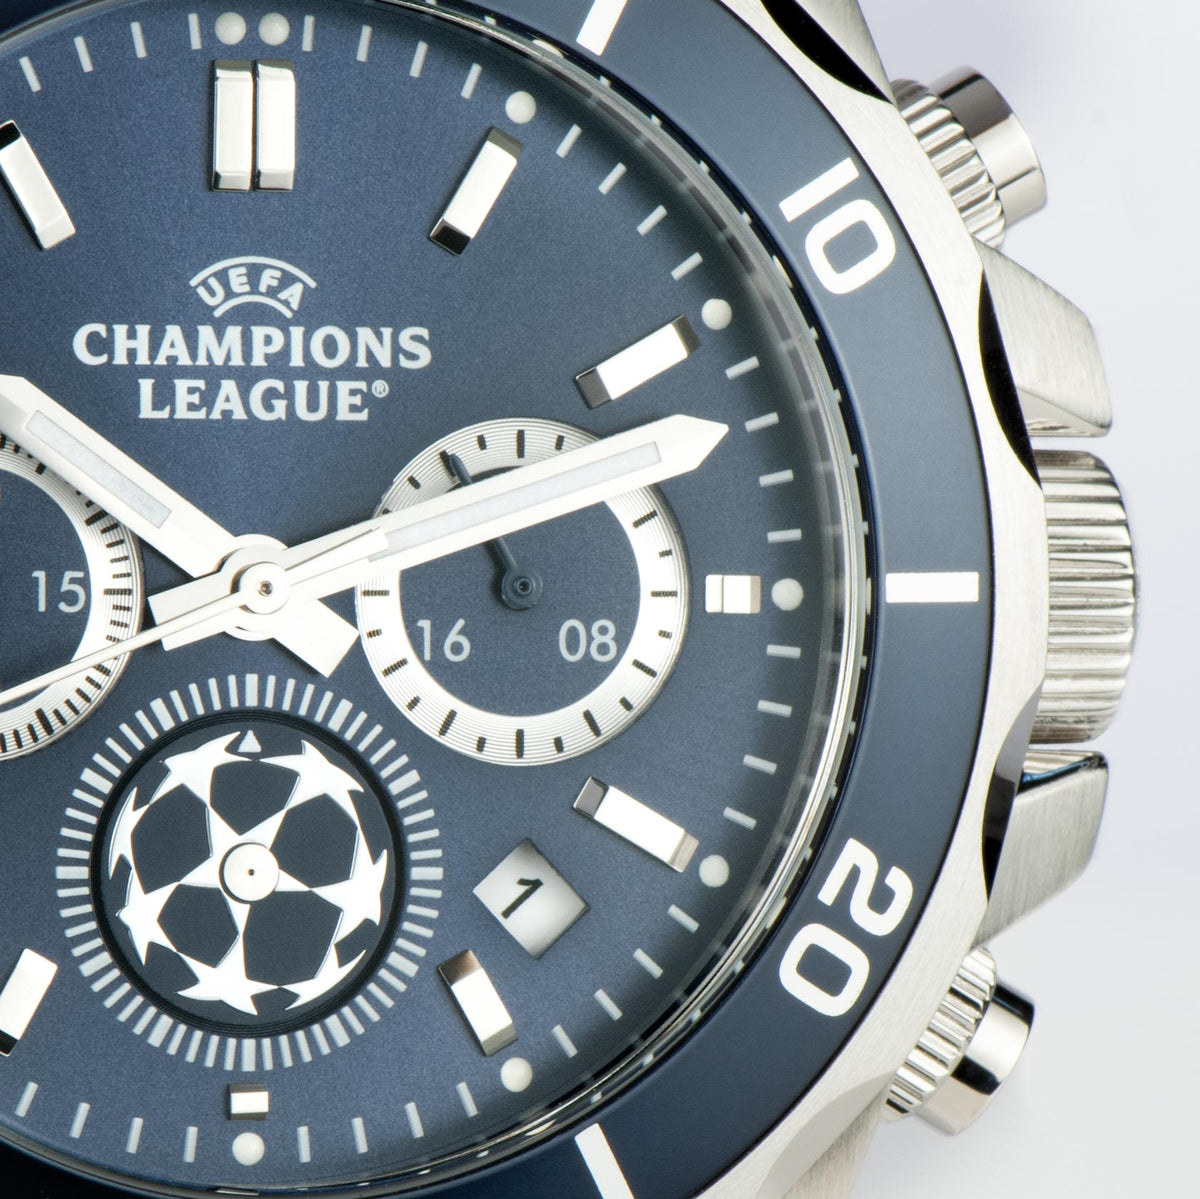 UCL Chronograph CL-103B Jacques Lemans Watch UEFA Club Competitions Online Store